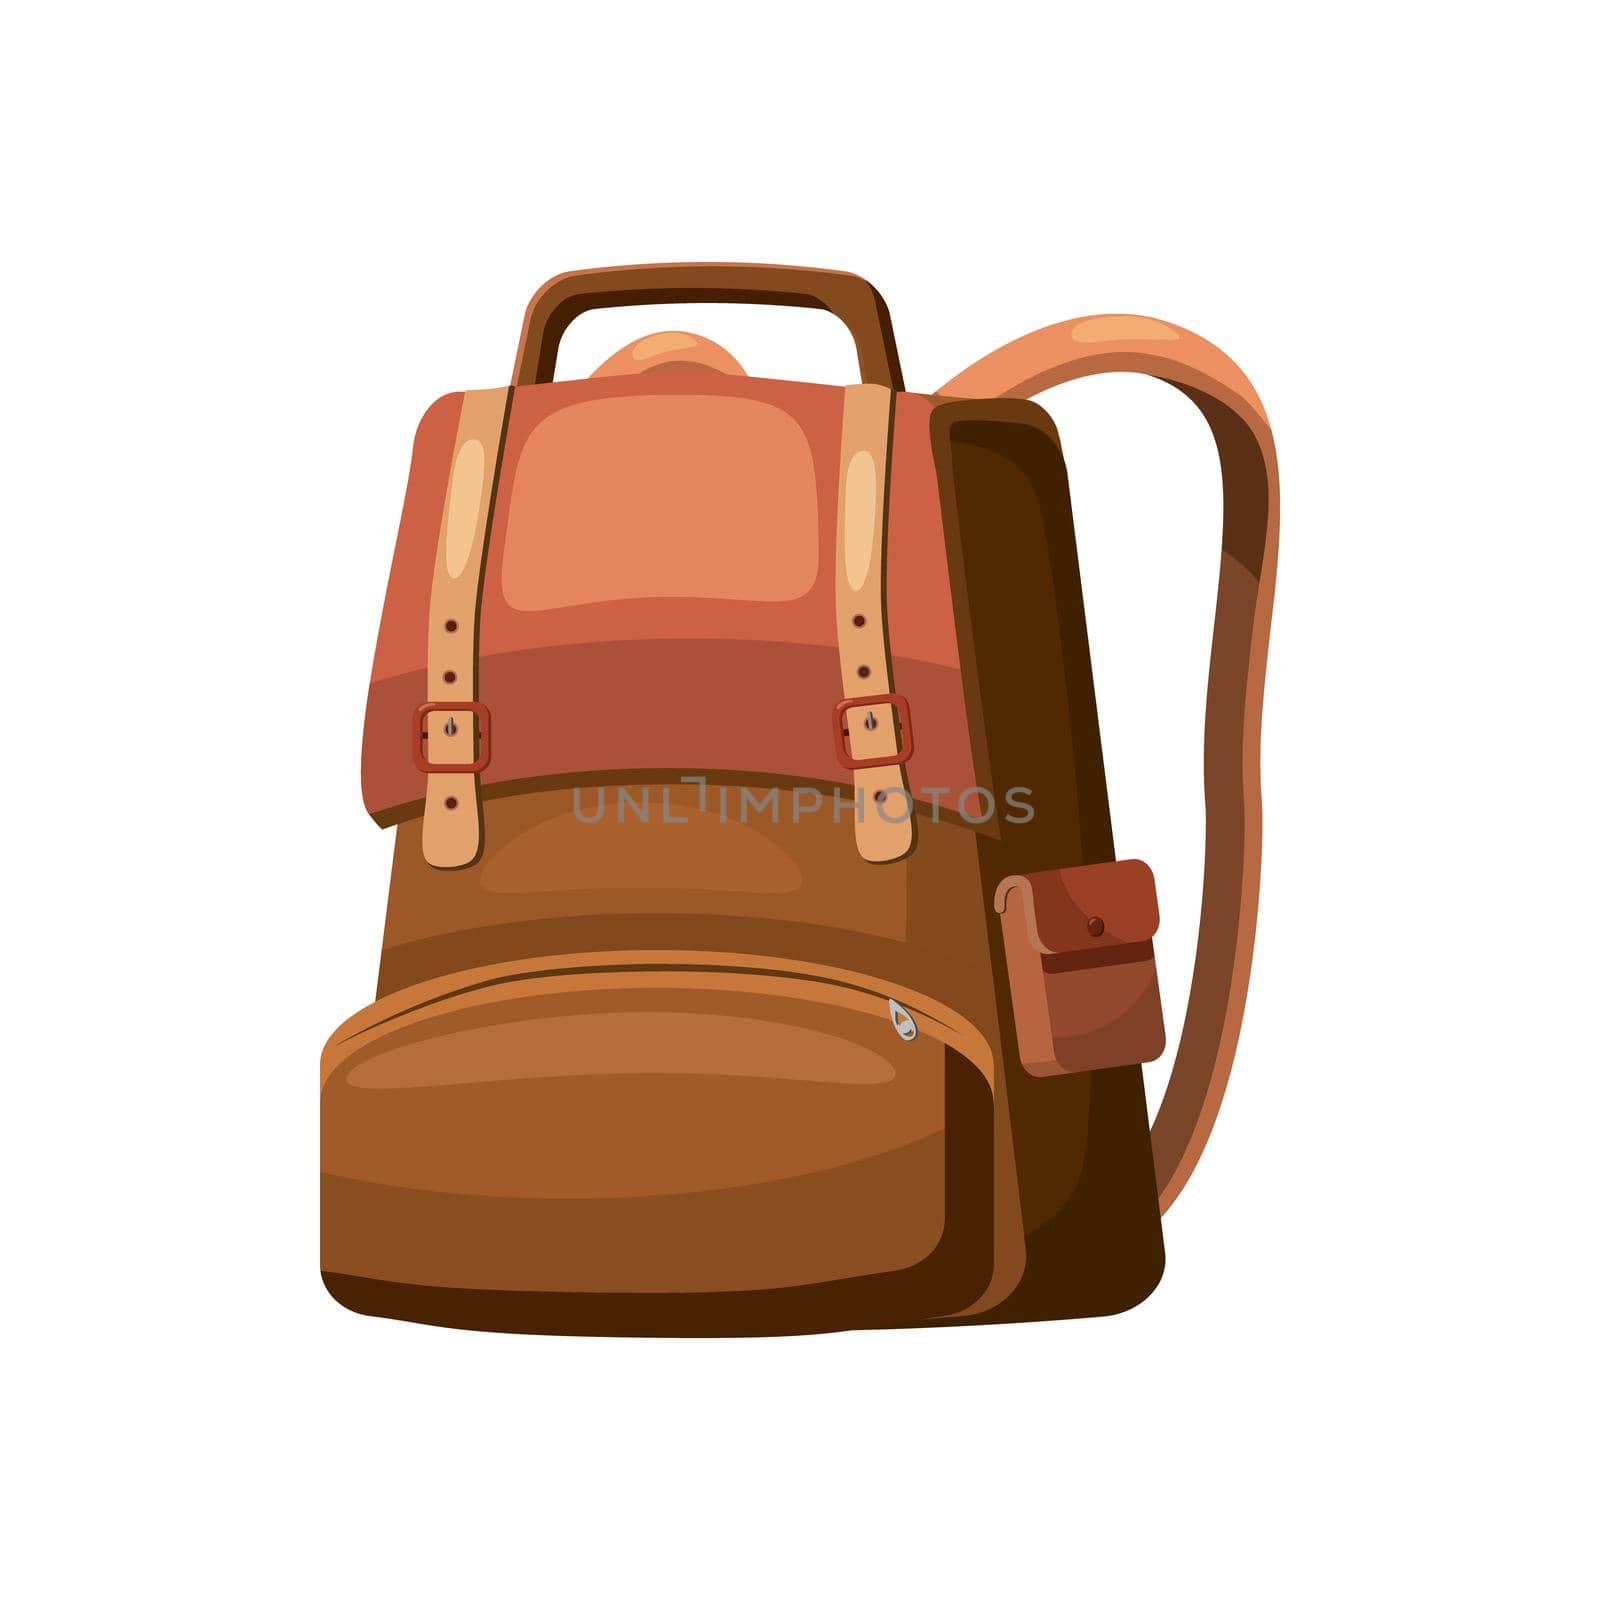 School bag icon, cartoon style by ylivdesign